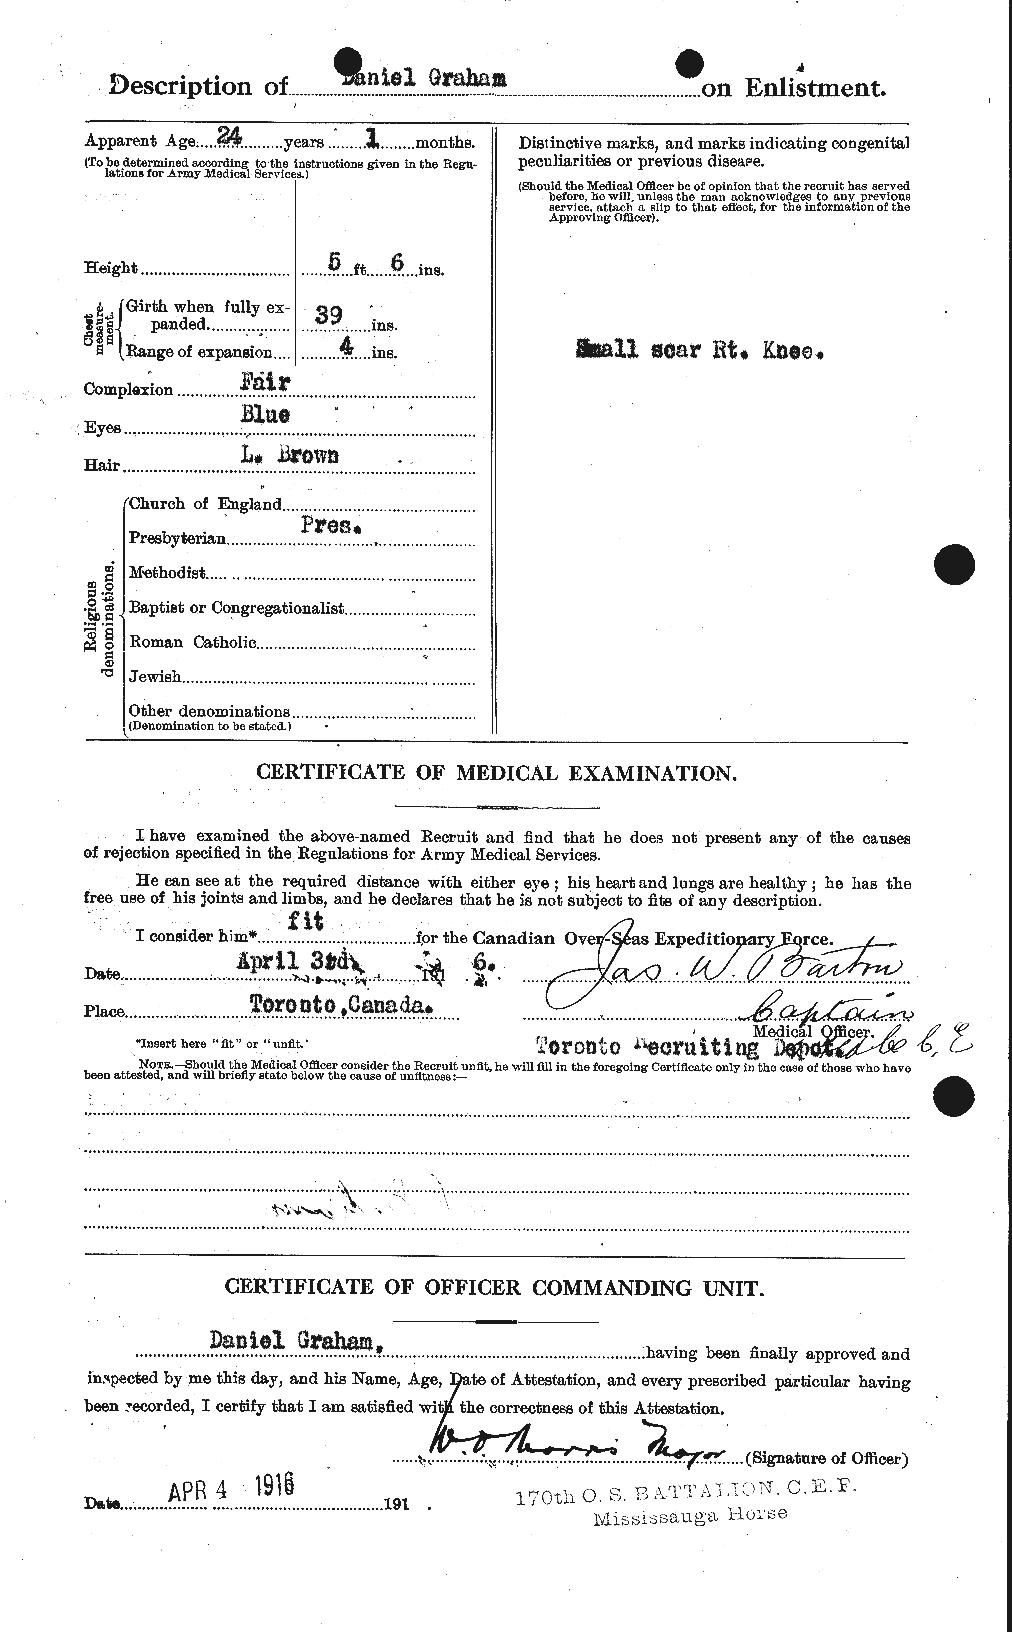 Personnel Records of the First World War - CEF 353810b